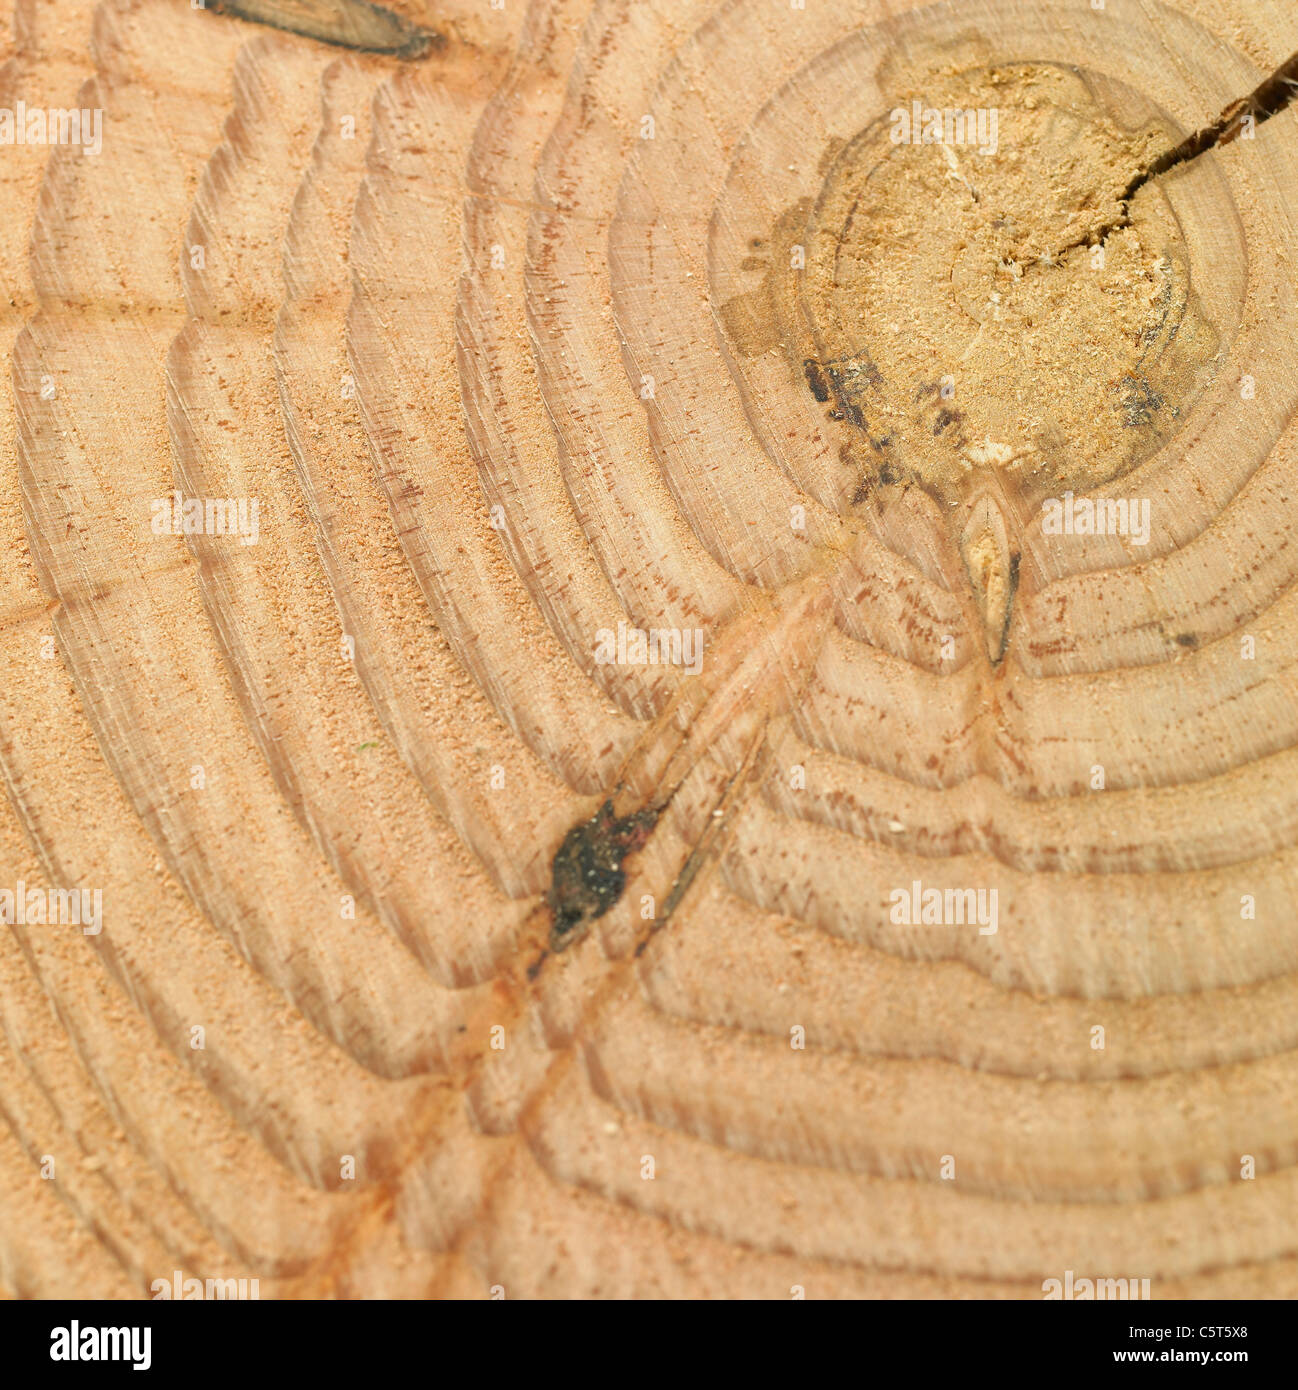 Cross section of logs Stock Photo